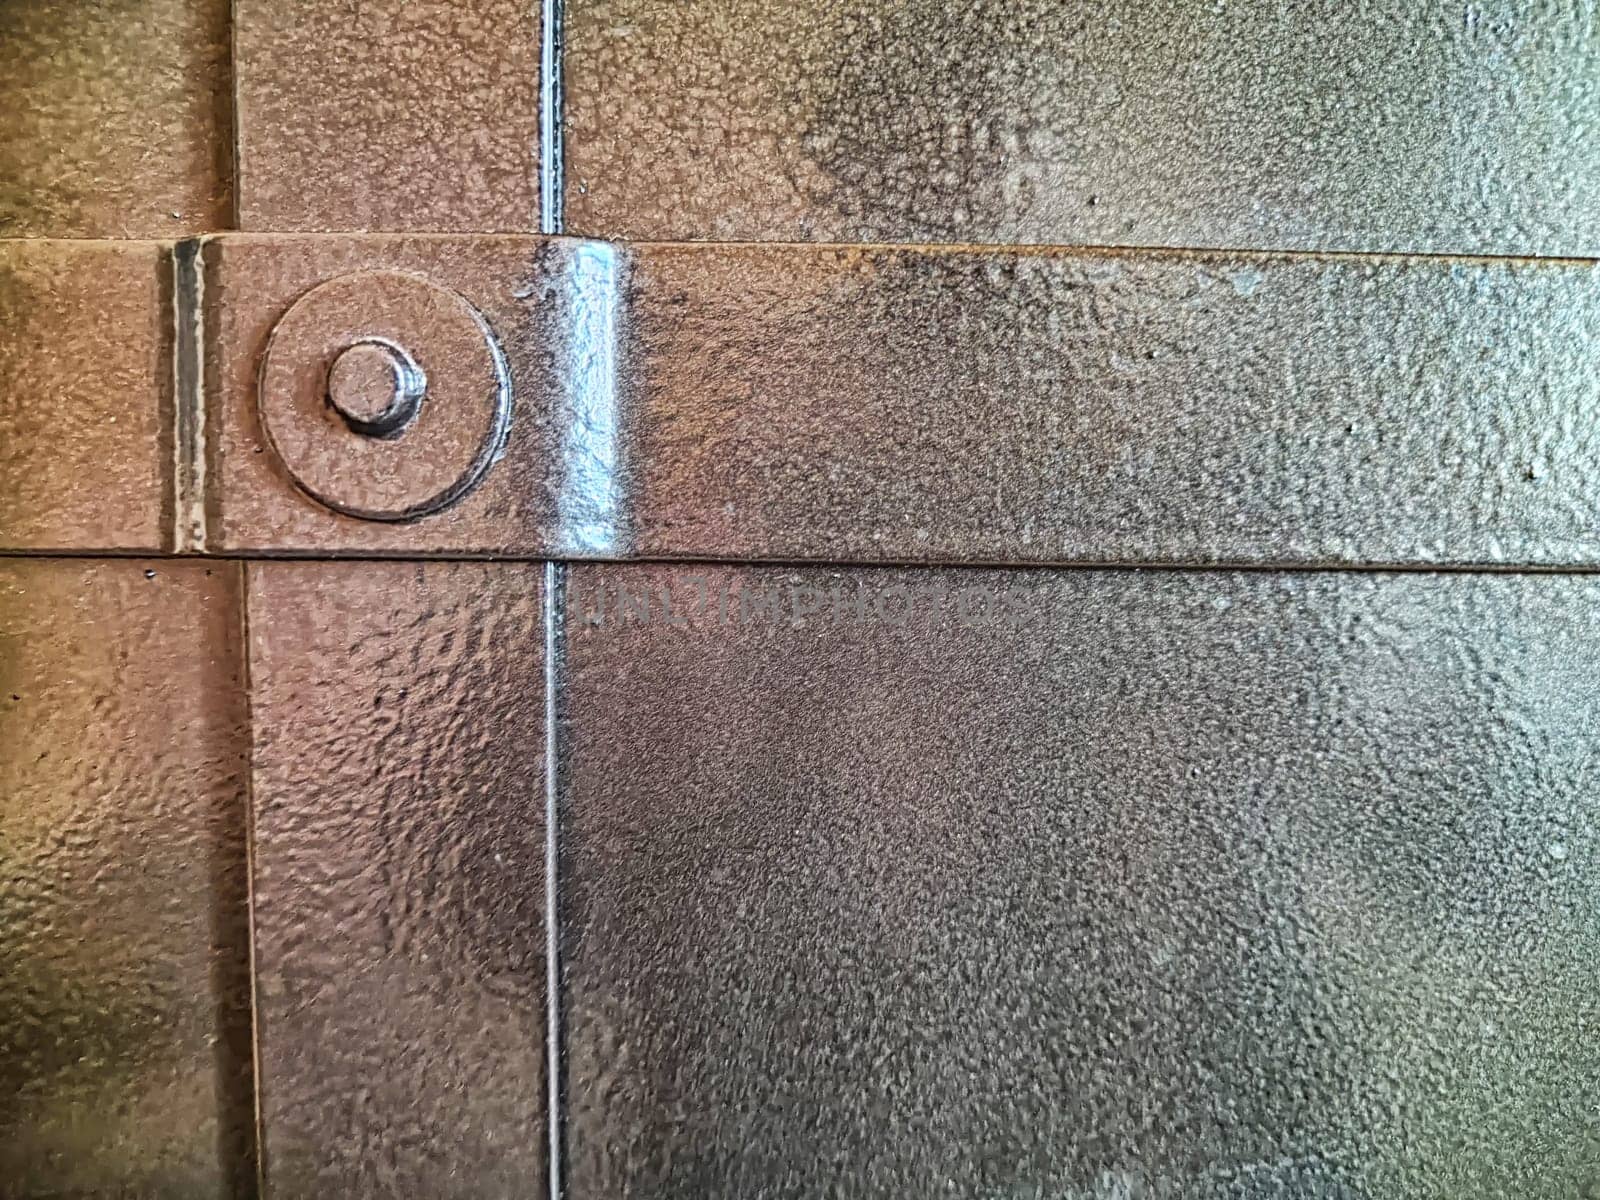 Forged rivet on a metal door or wall. Background, texture. Forged steel rivet connecting textured metal plates